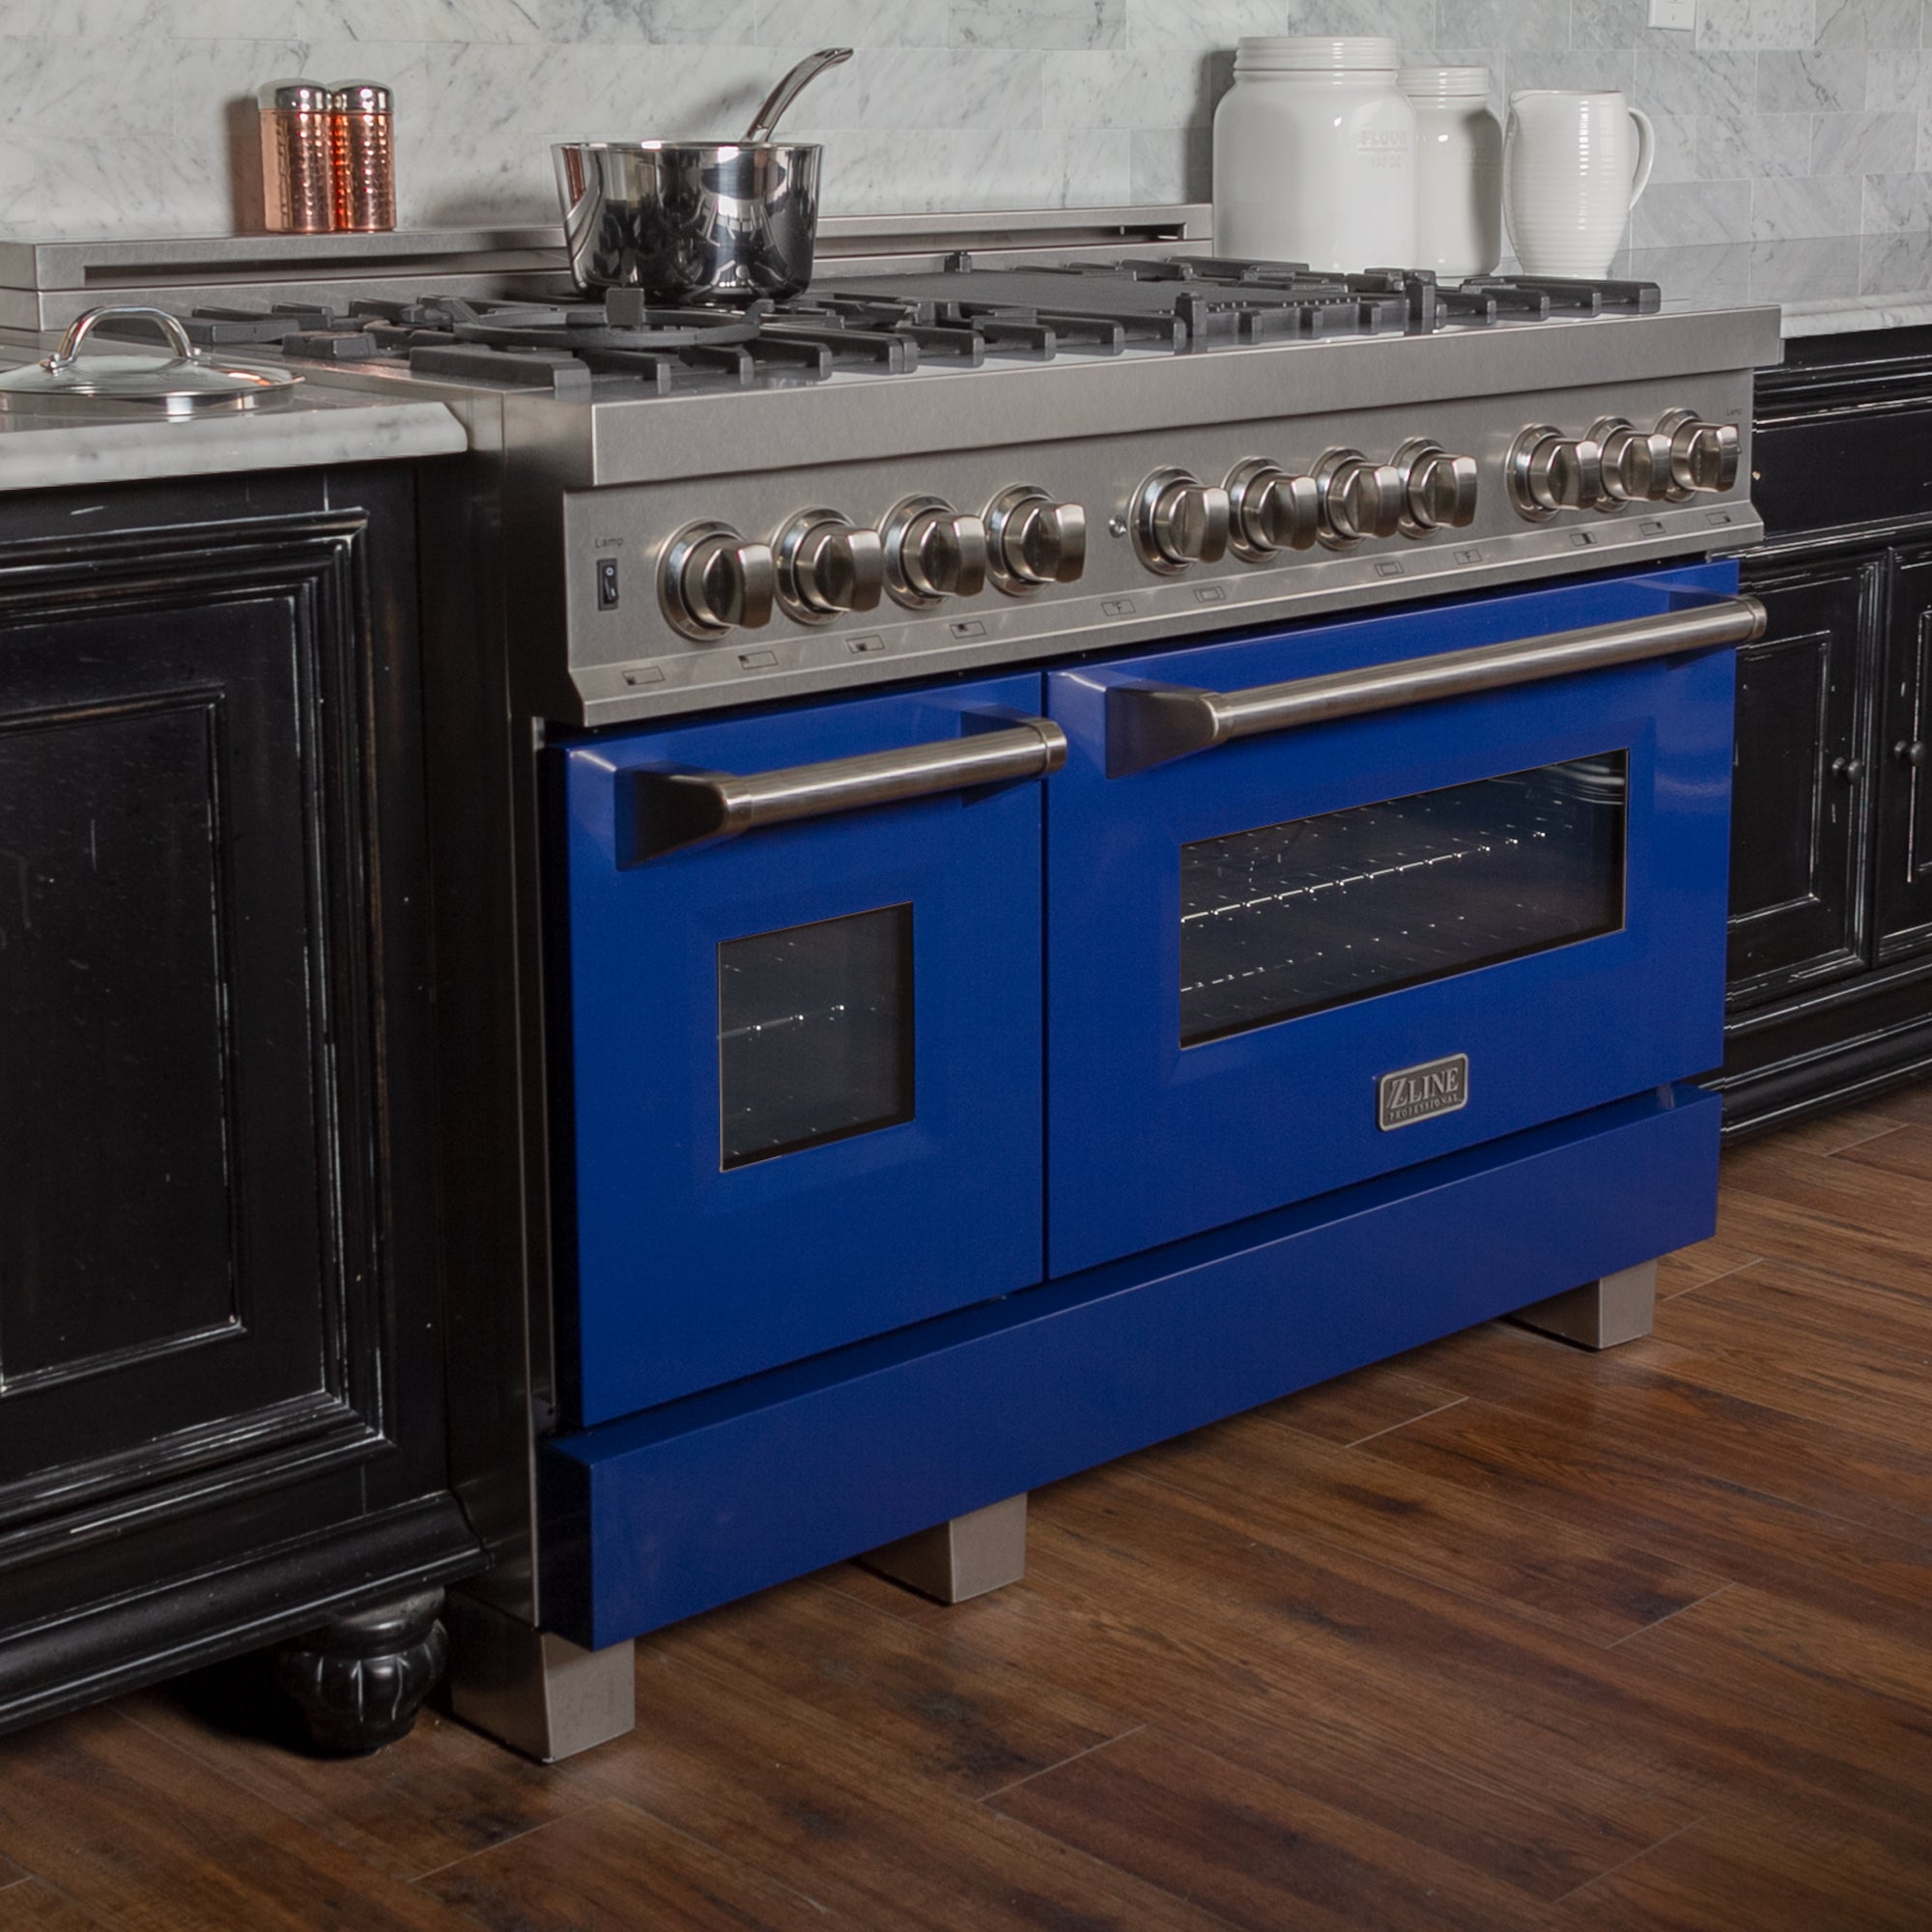 ZLINE 48" 6.0 cu. ft. Dual Fuel Range with Gas Stove and Electric Oven in Fingerprint Resistant Stainless Steel and Blue Gloss Door (RAS-BG-48)